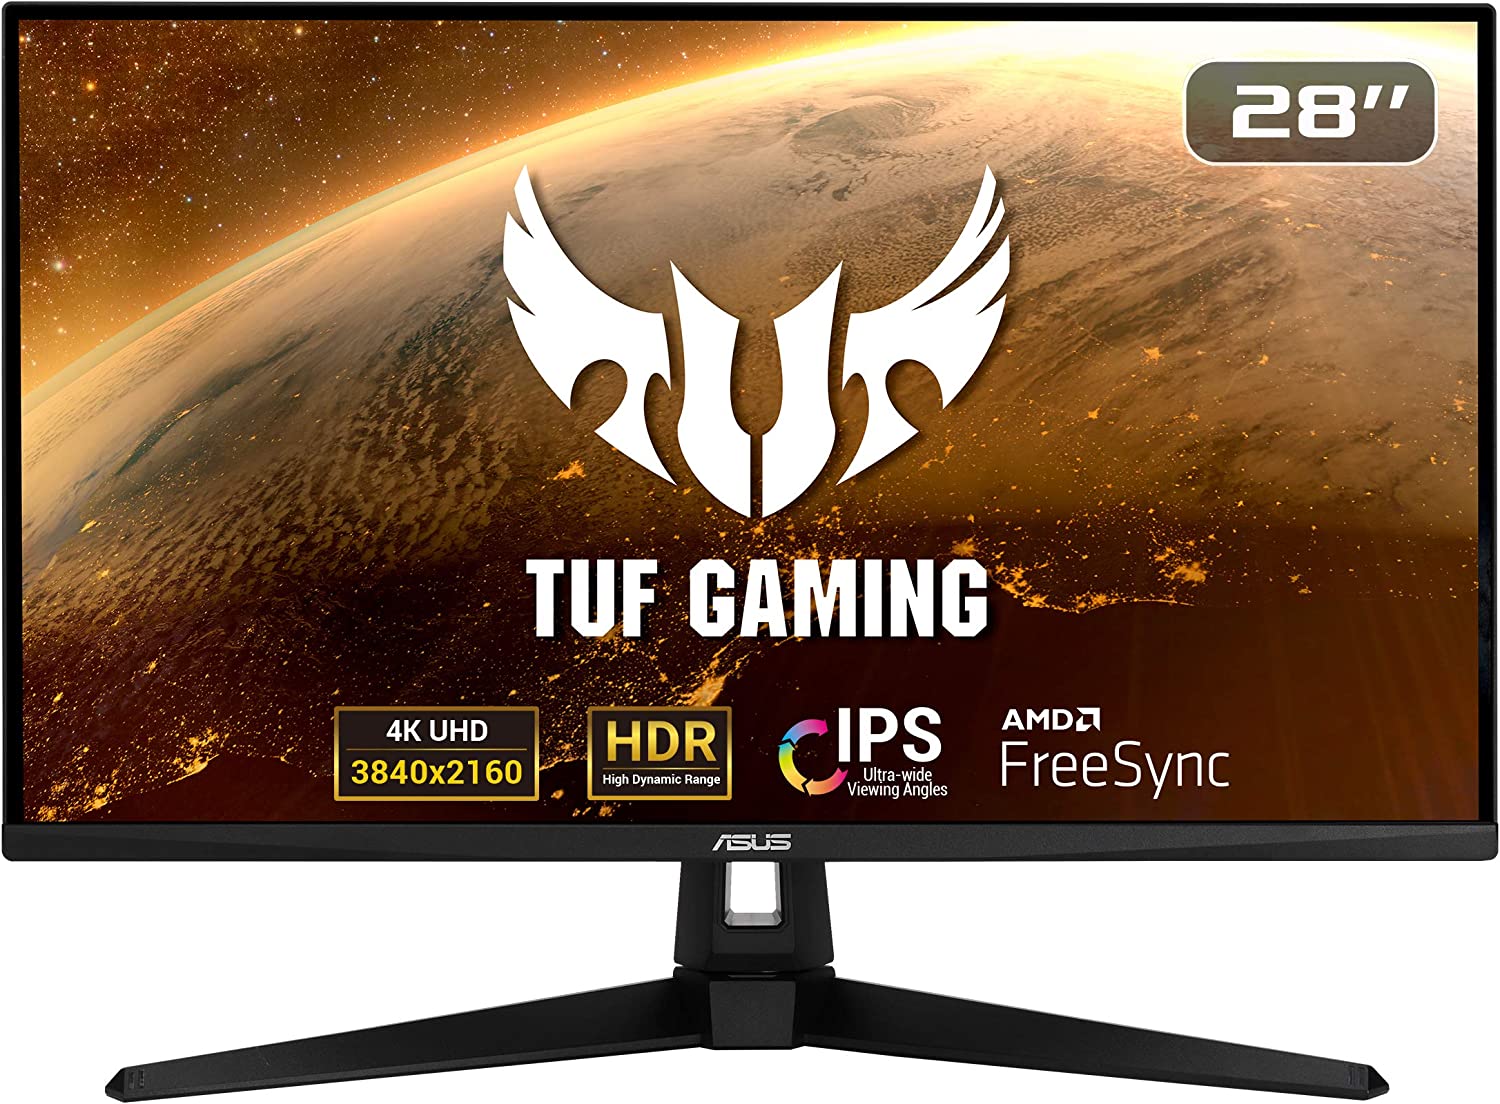 Review of the Asus TUF Gaming VG289Q